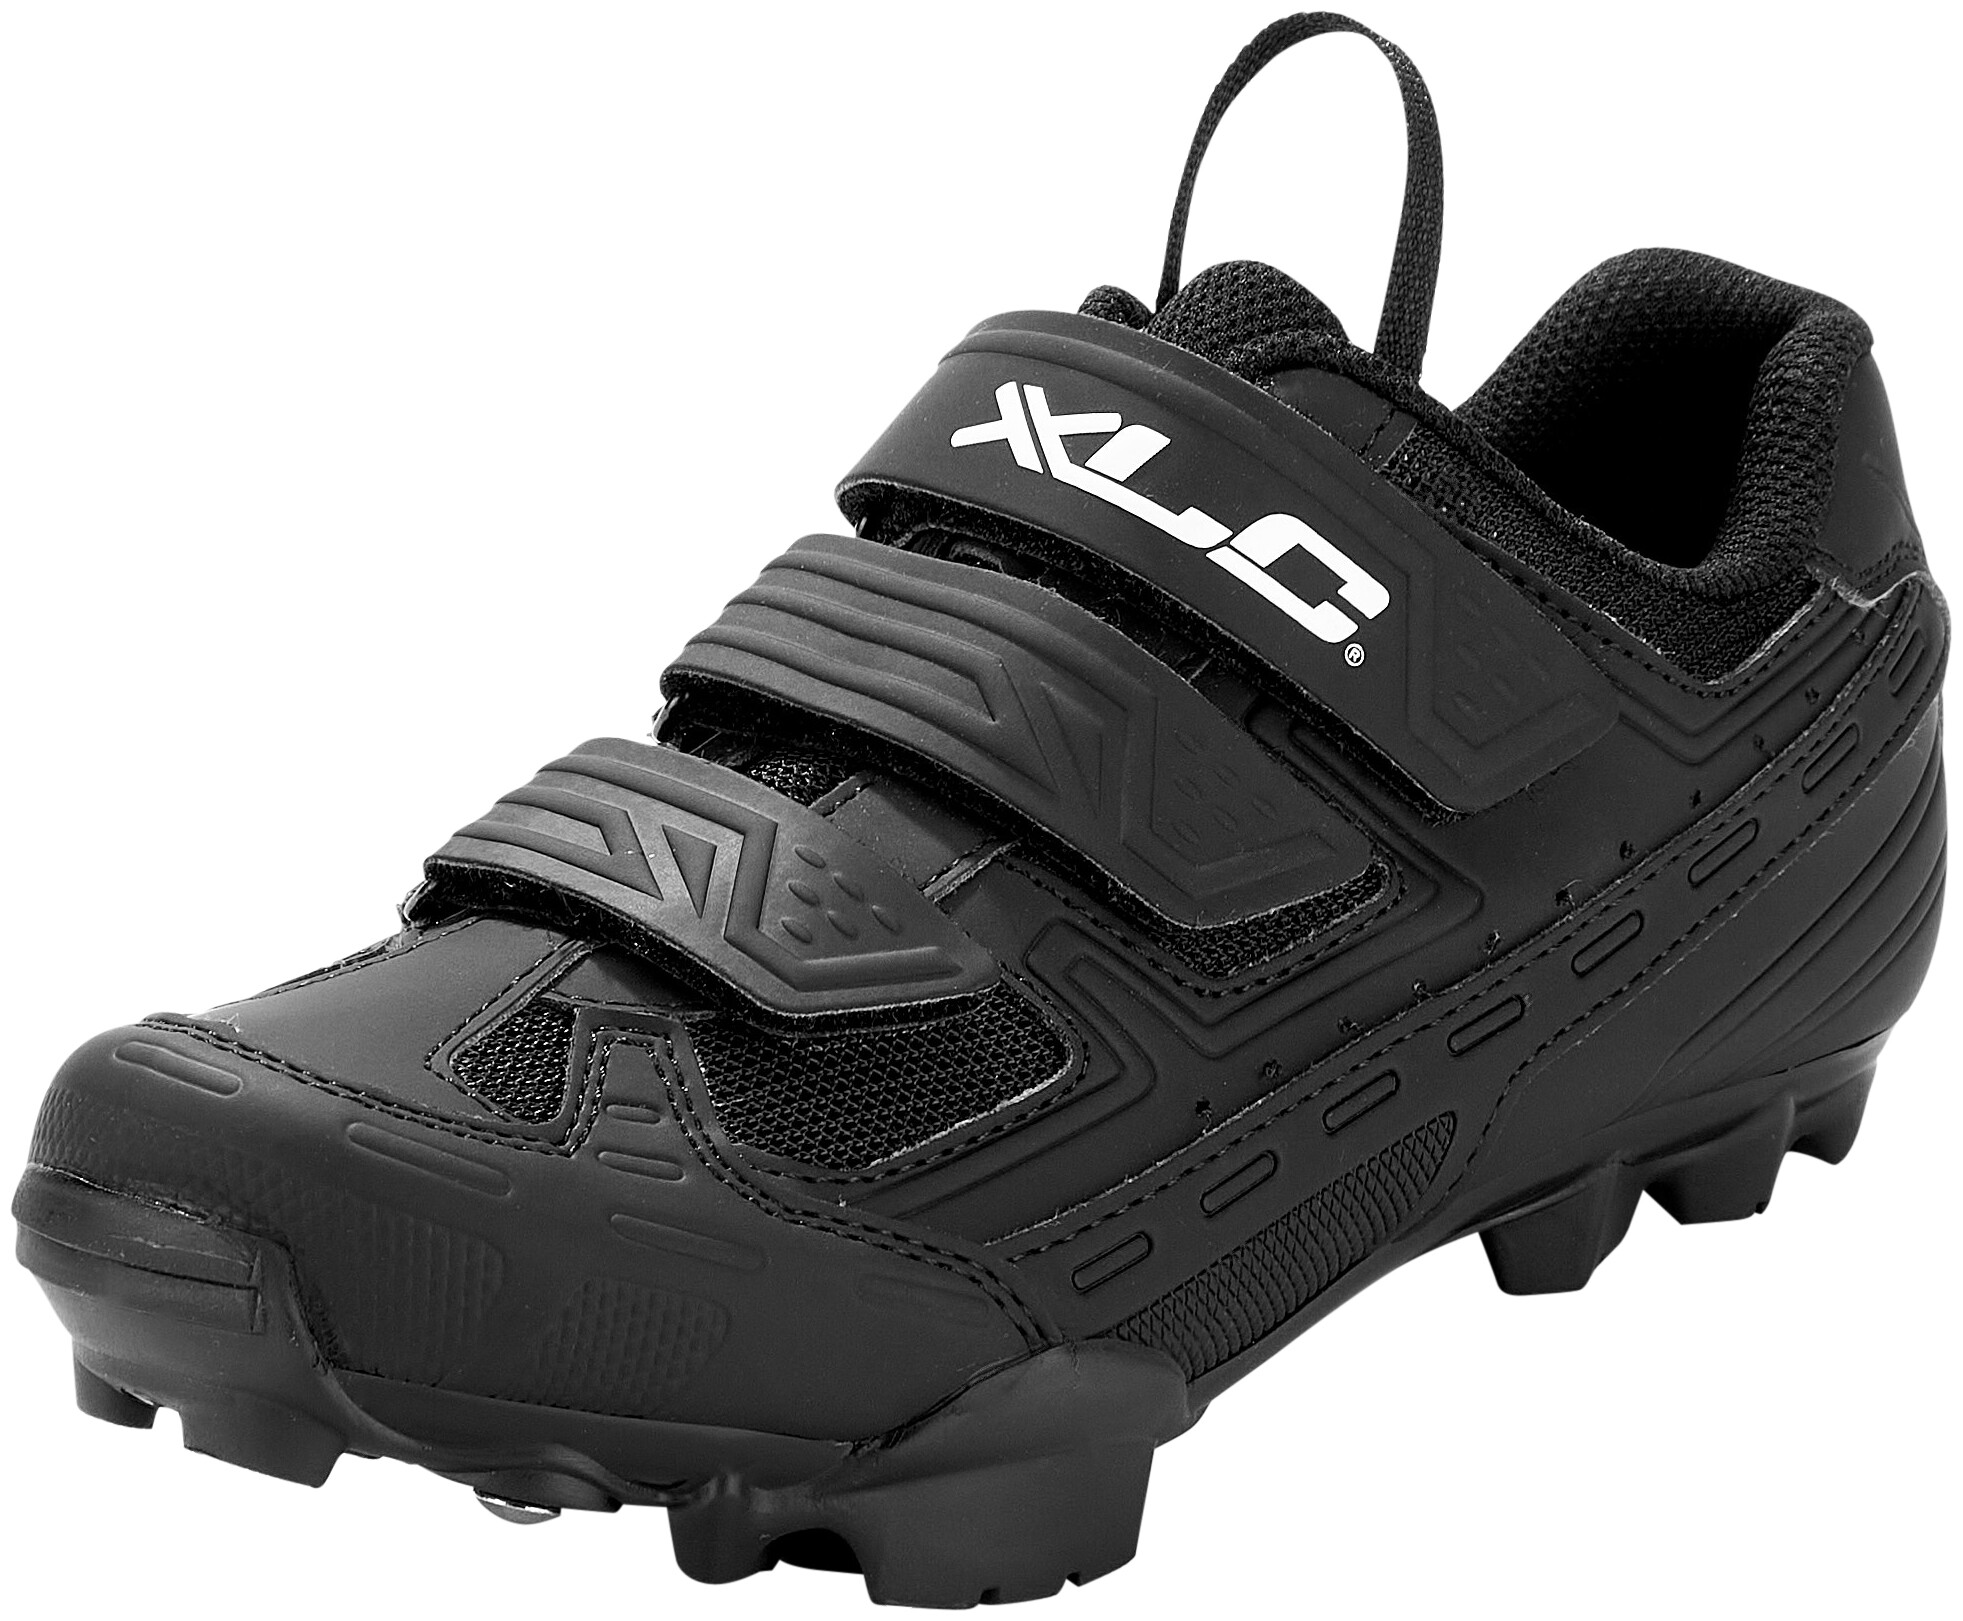 Details about   XLC MTB MOUNTAIN BIKE SHOES CB-M06 BLACK SIZE UK 11 BRAND NEW IN BOX 